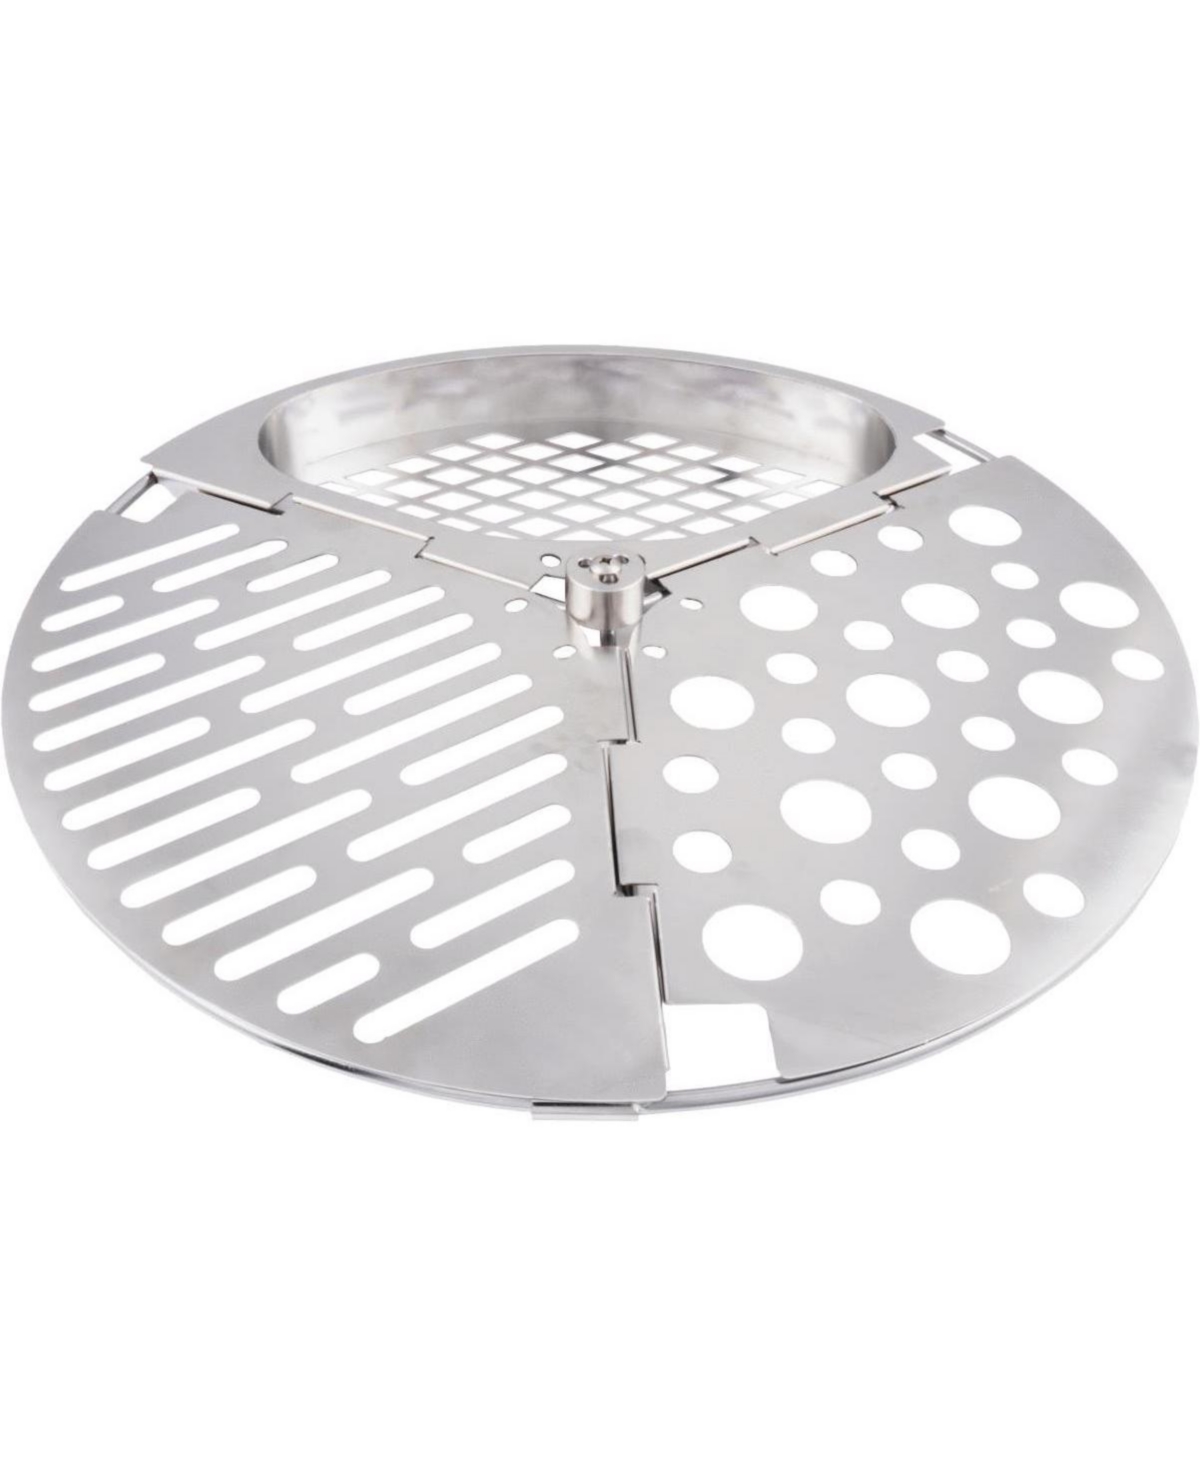 258678 3 Piece Stainless Steel Bronco Grate Kit - Silver